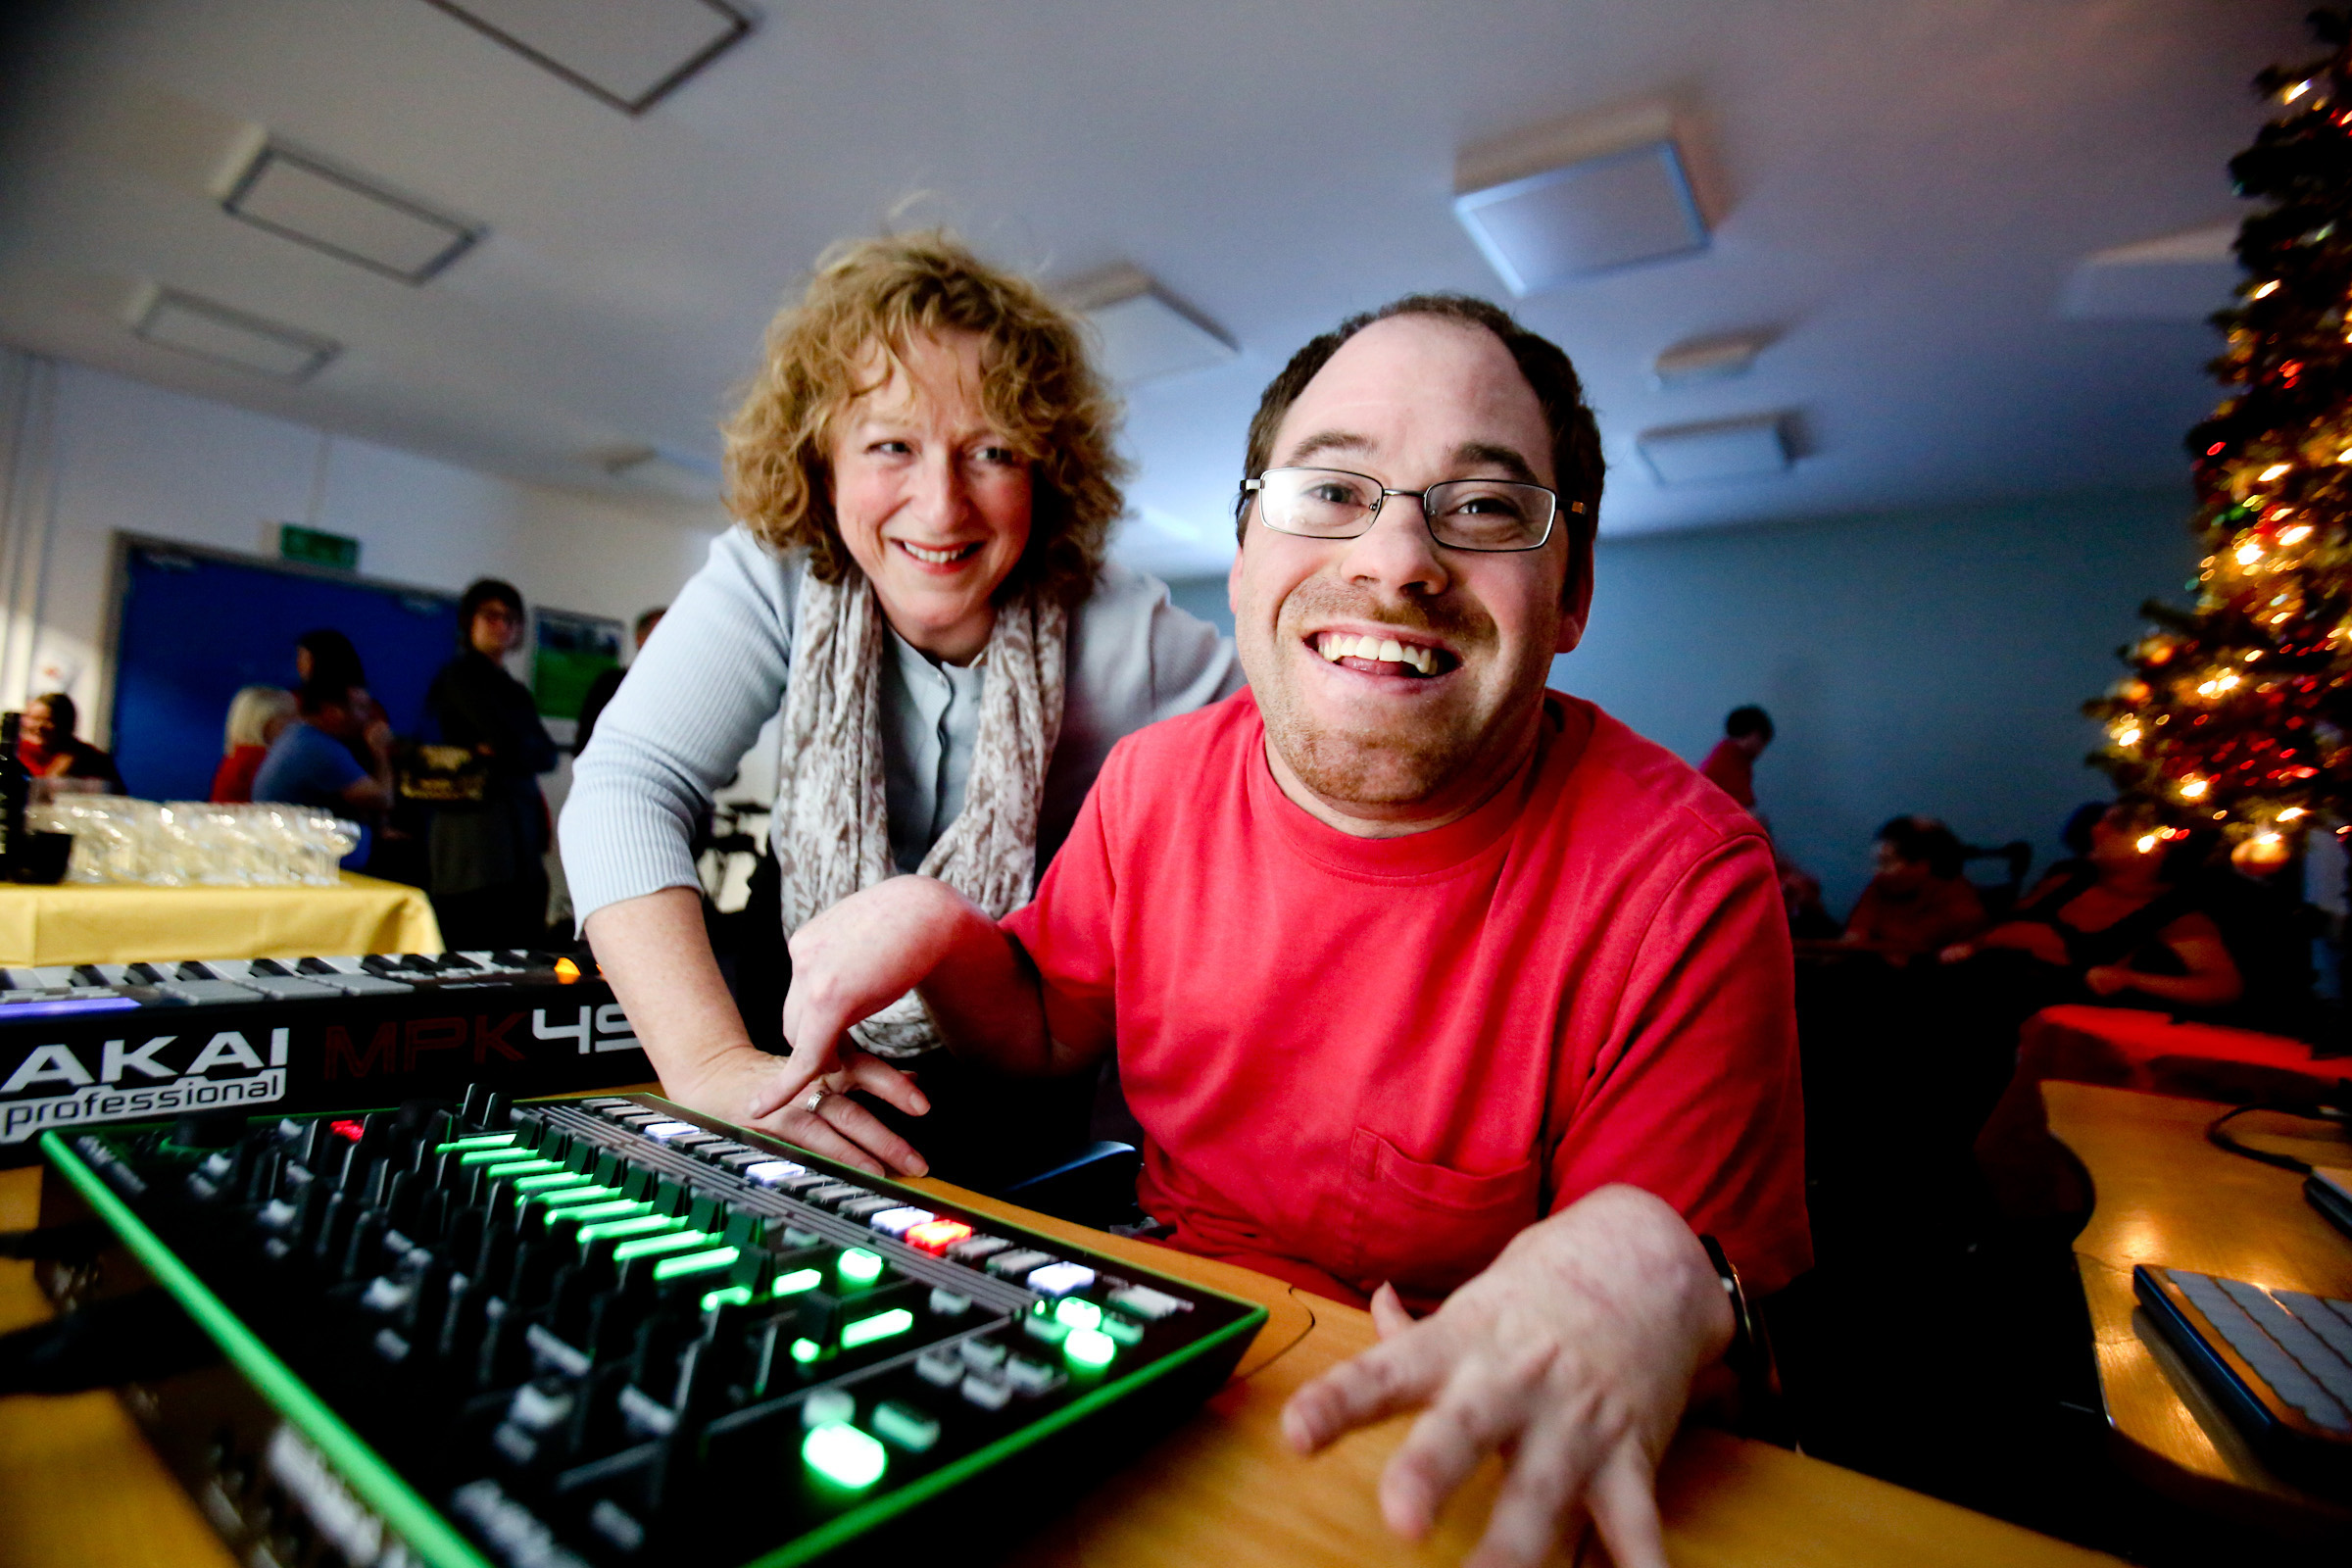 Musician Tim Leathem and sister Helen show off the impressive computerised music technology installed in Drake Music’s new state-of-the-art studio on the Springfield Road in Belfast. The new space will enable Drake to double the number of disabled musicians it can accommodate to compose and perform music. For more details about Drake Music, visit its website: www.drakemusicni.com